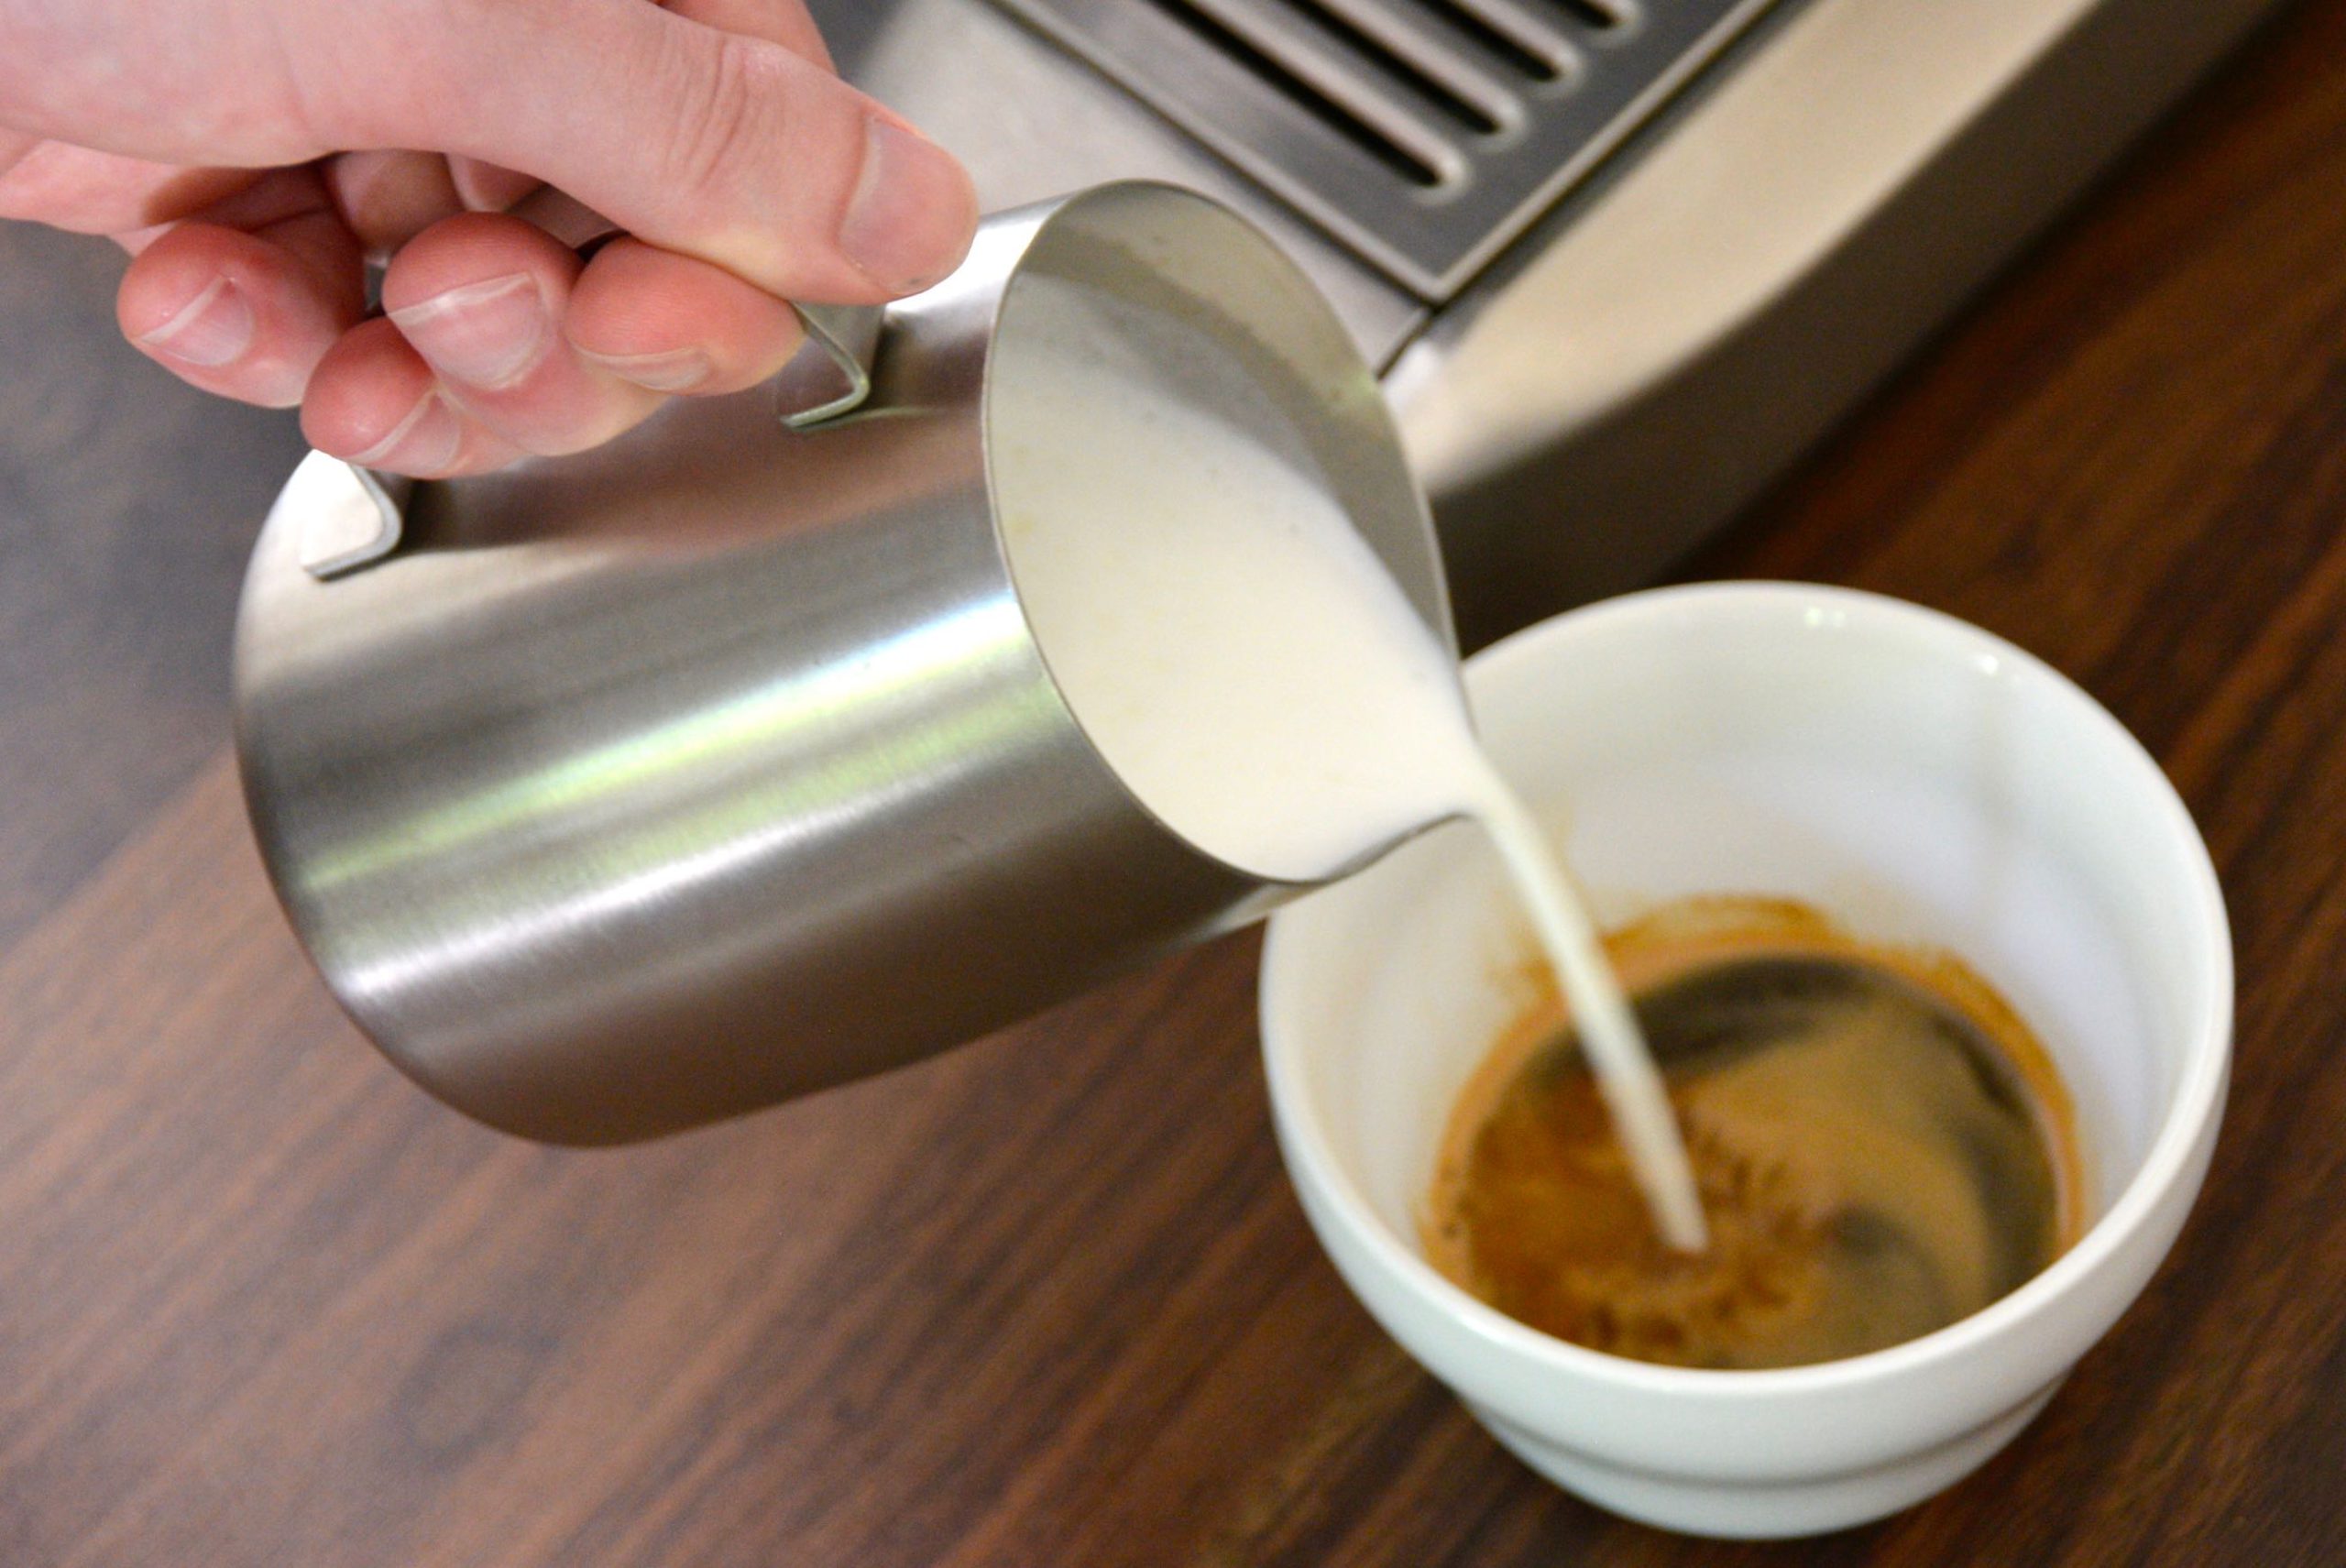 How to steam milk like a barista